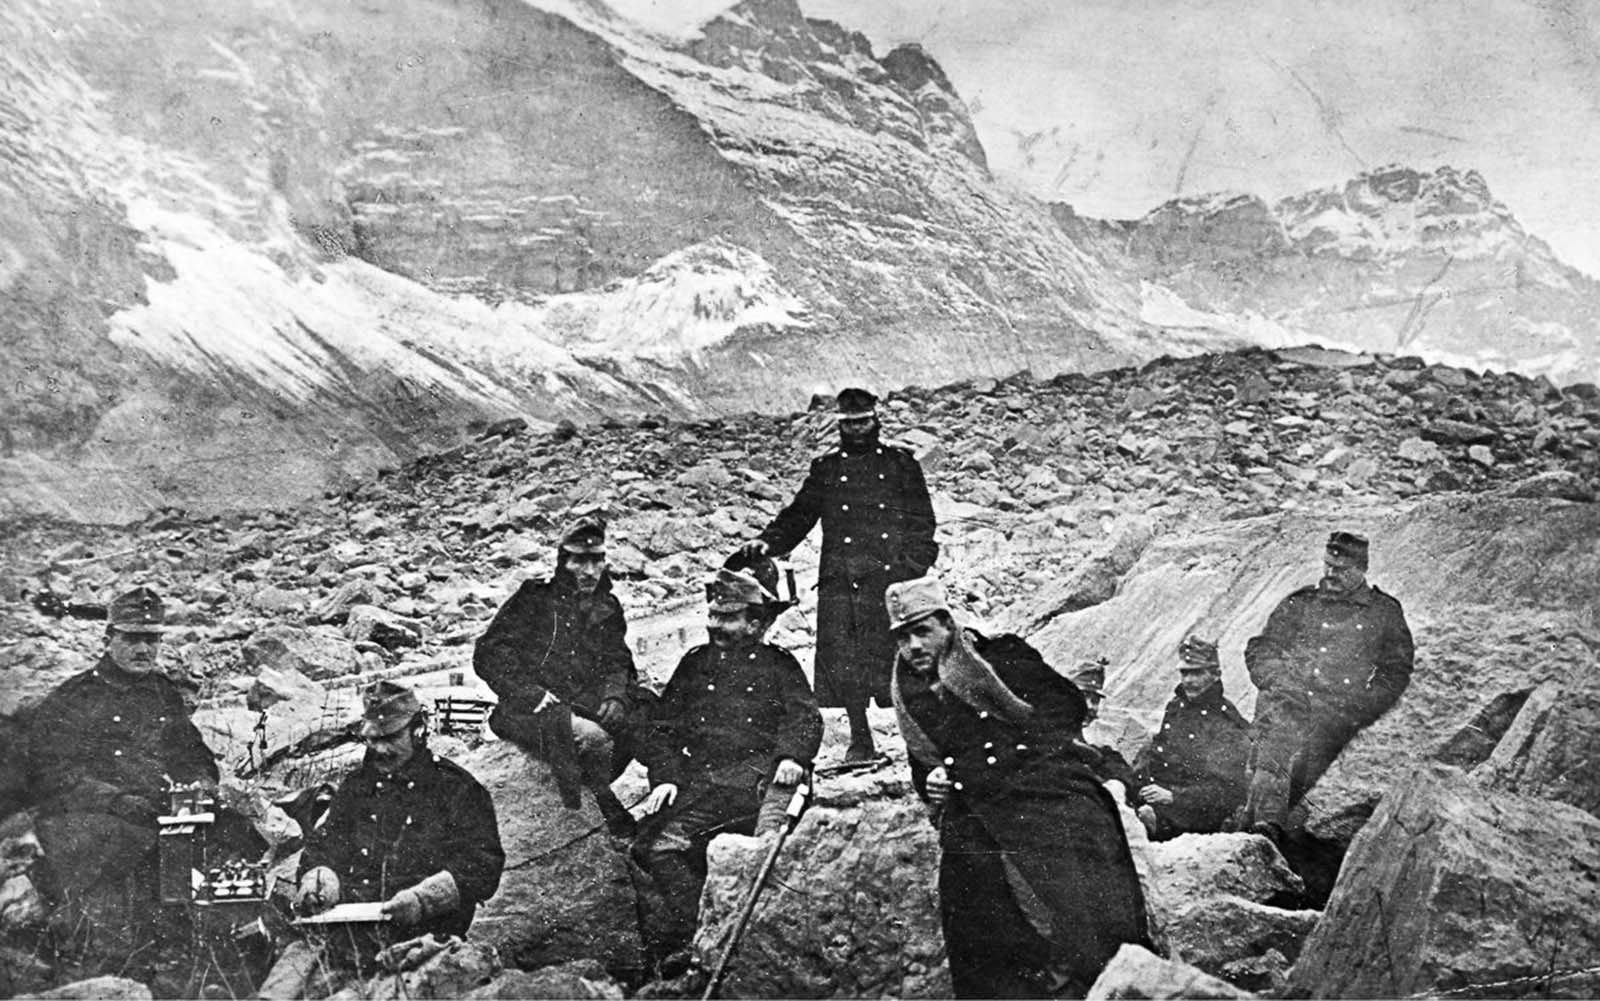 Austrian troops near the front line in the Dolomites. 1917.